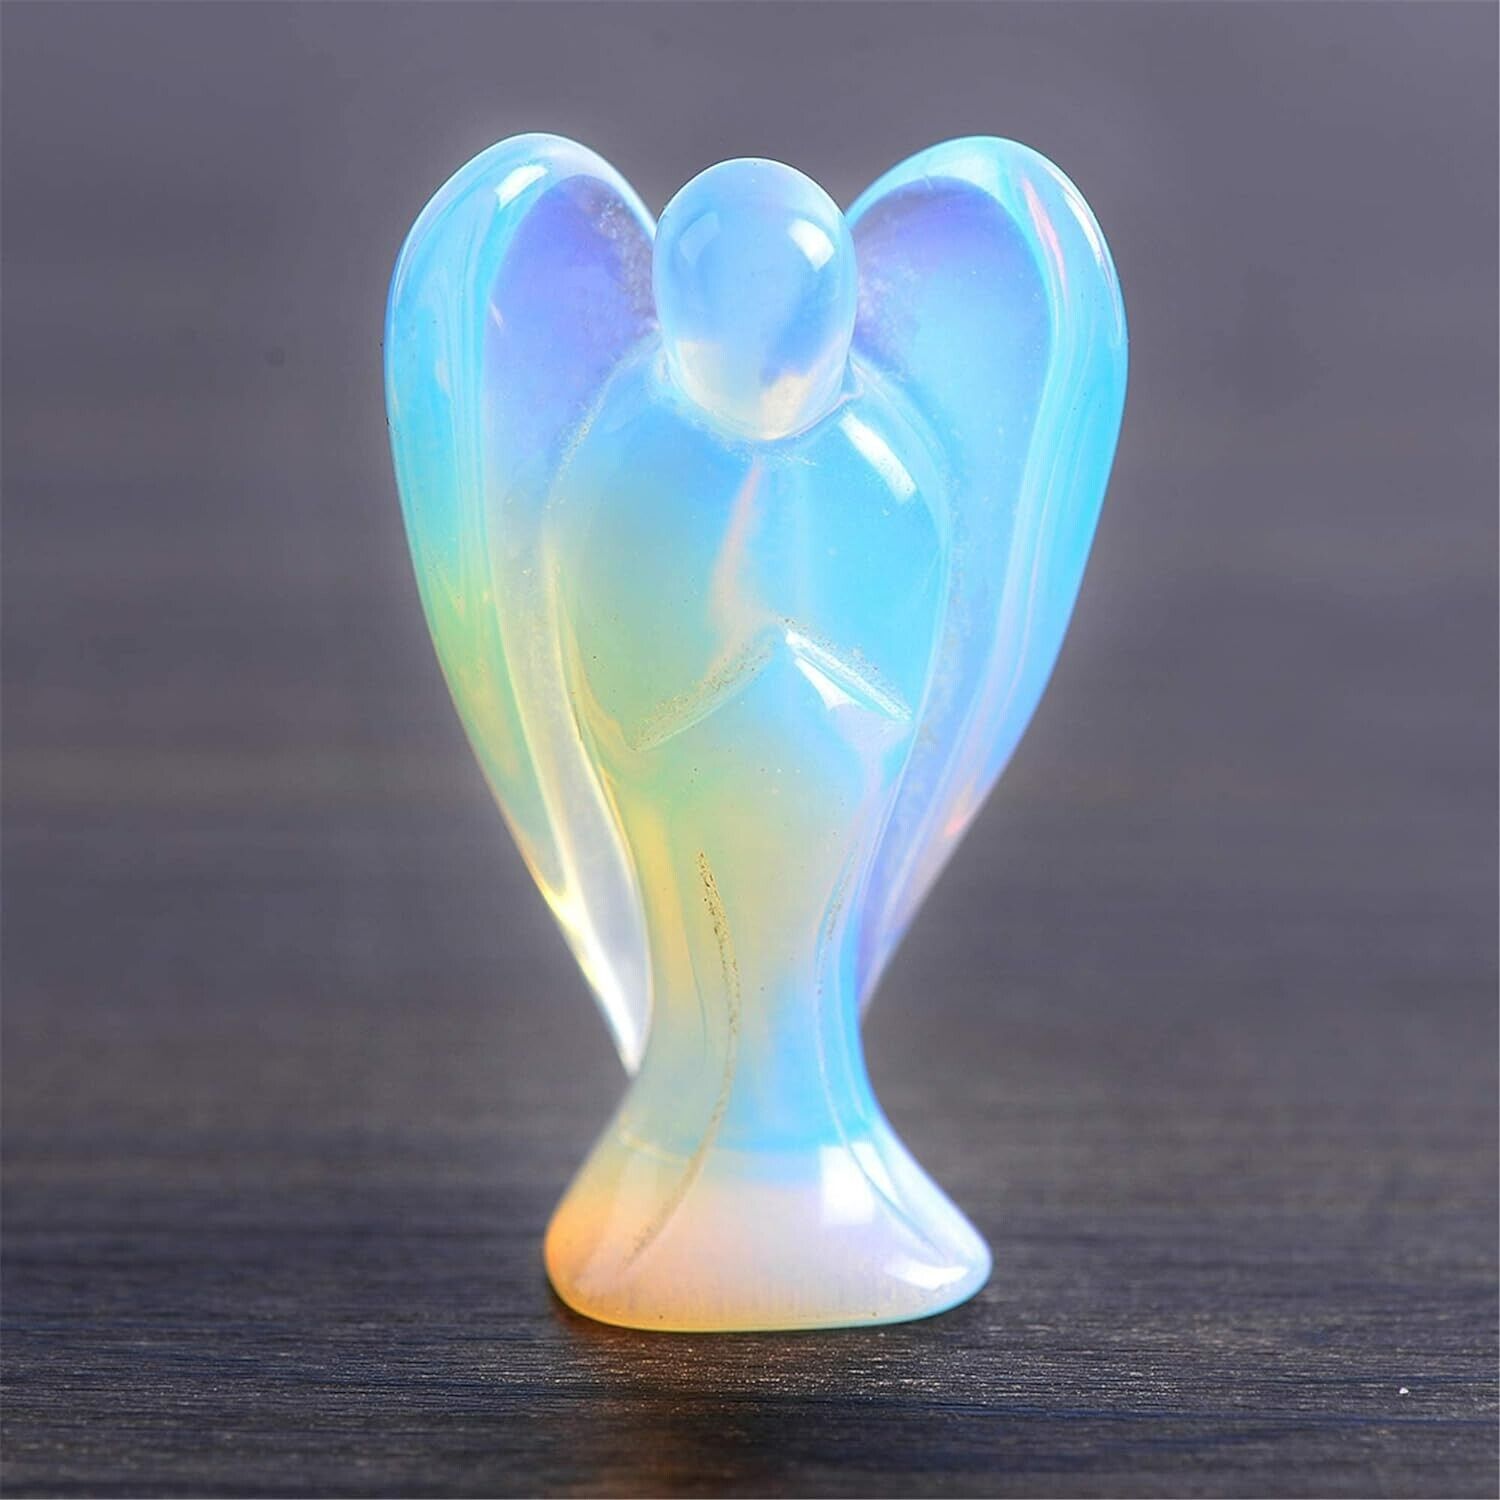 Opalite Angel Statue Handcrafted Blue Clear Crystal Specimen Home Decor Gift